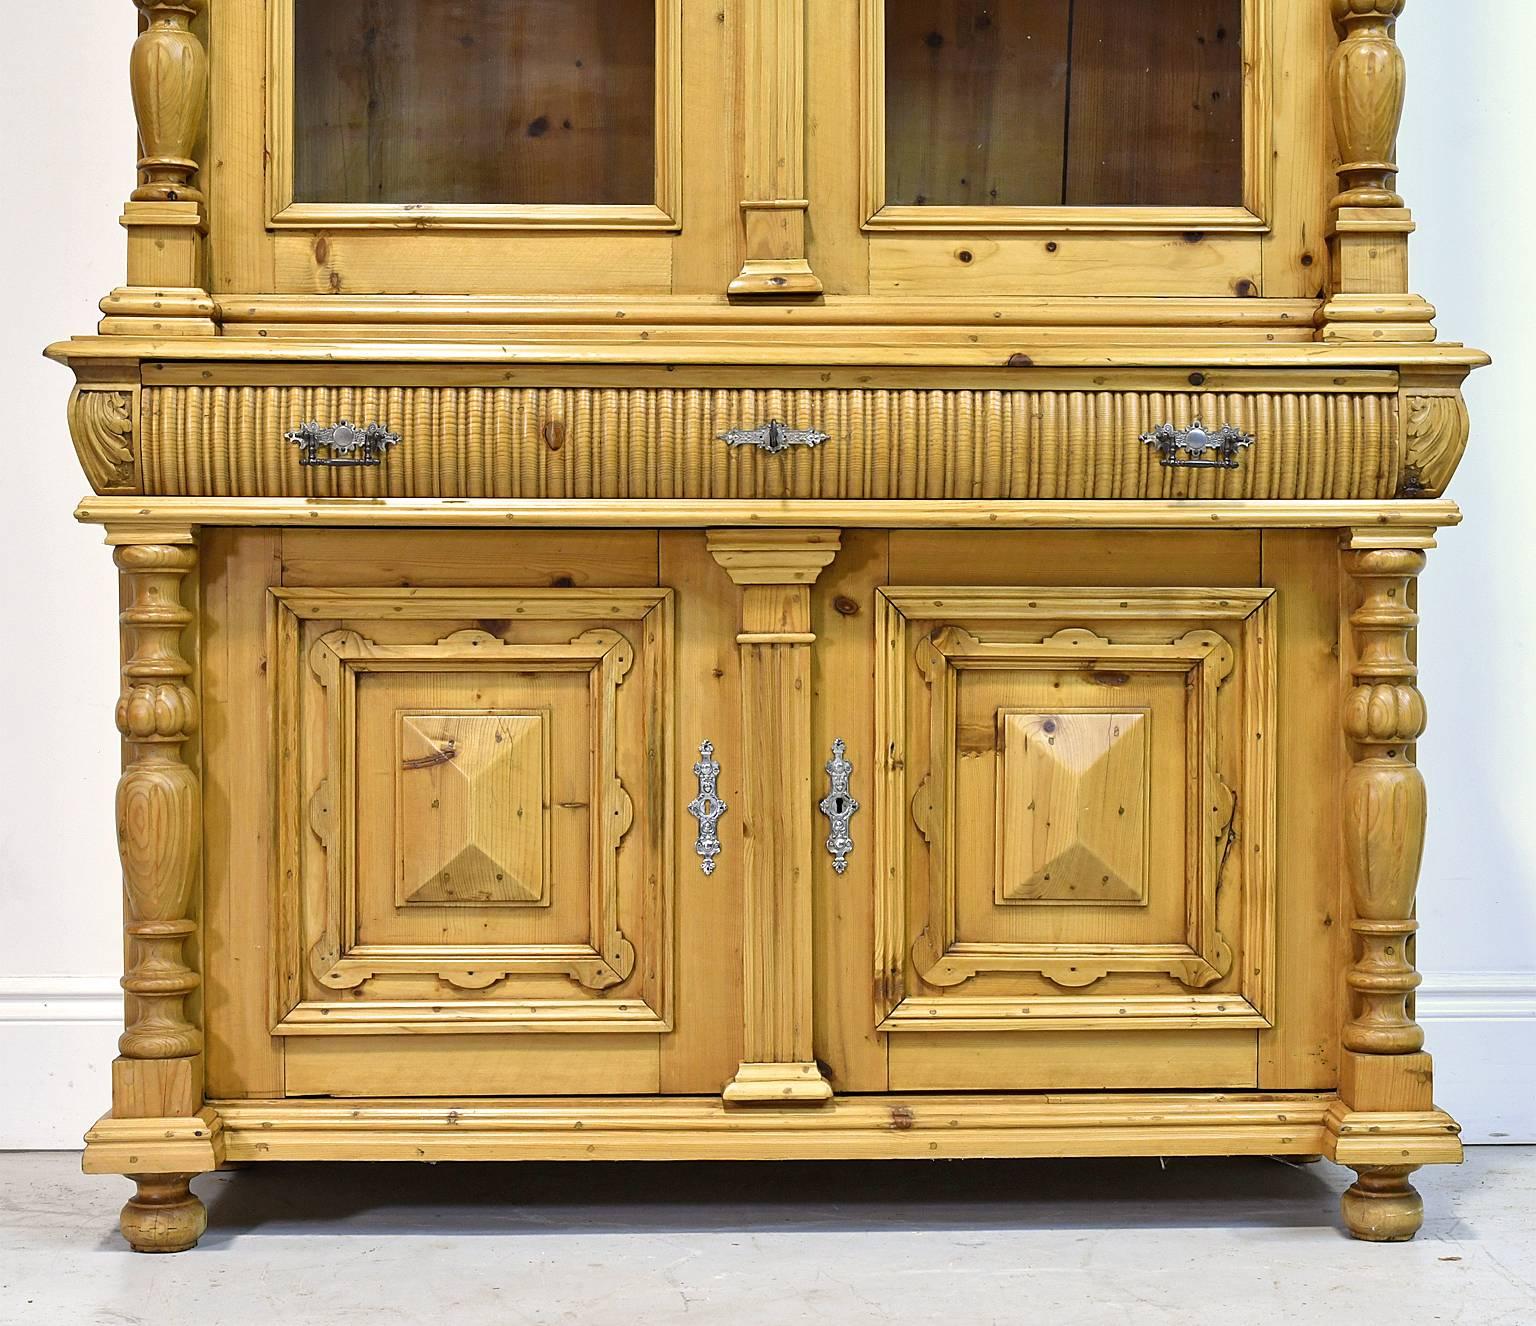 Hand-Carved Large Pine Belle Époque Bookcase or Buffet from Bohemia, c. 1880 For Sale